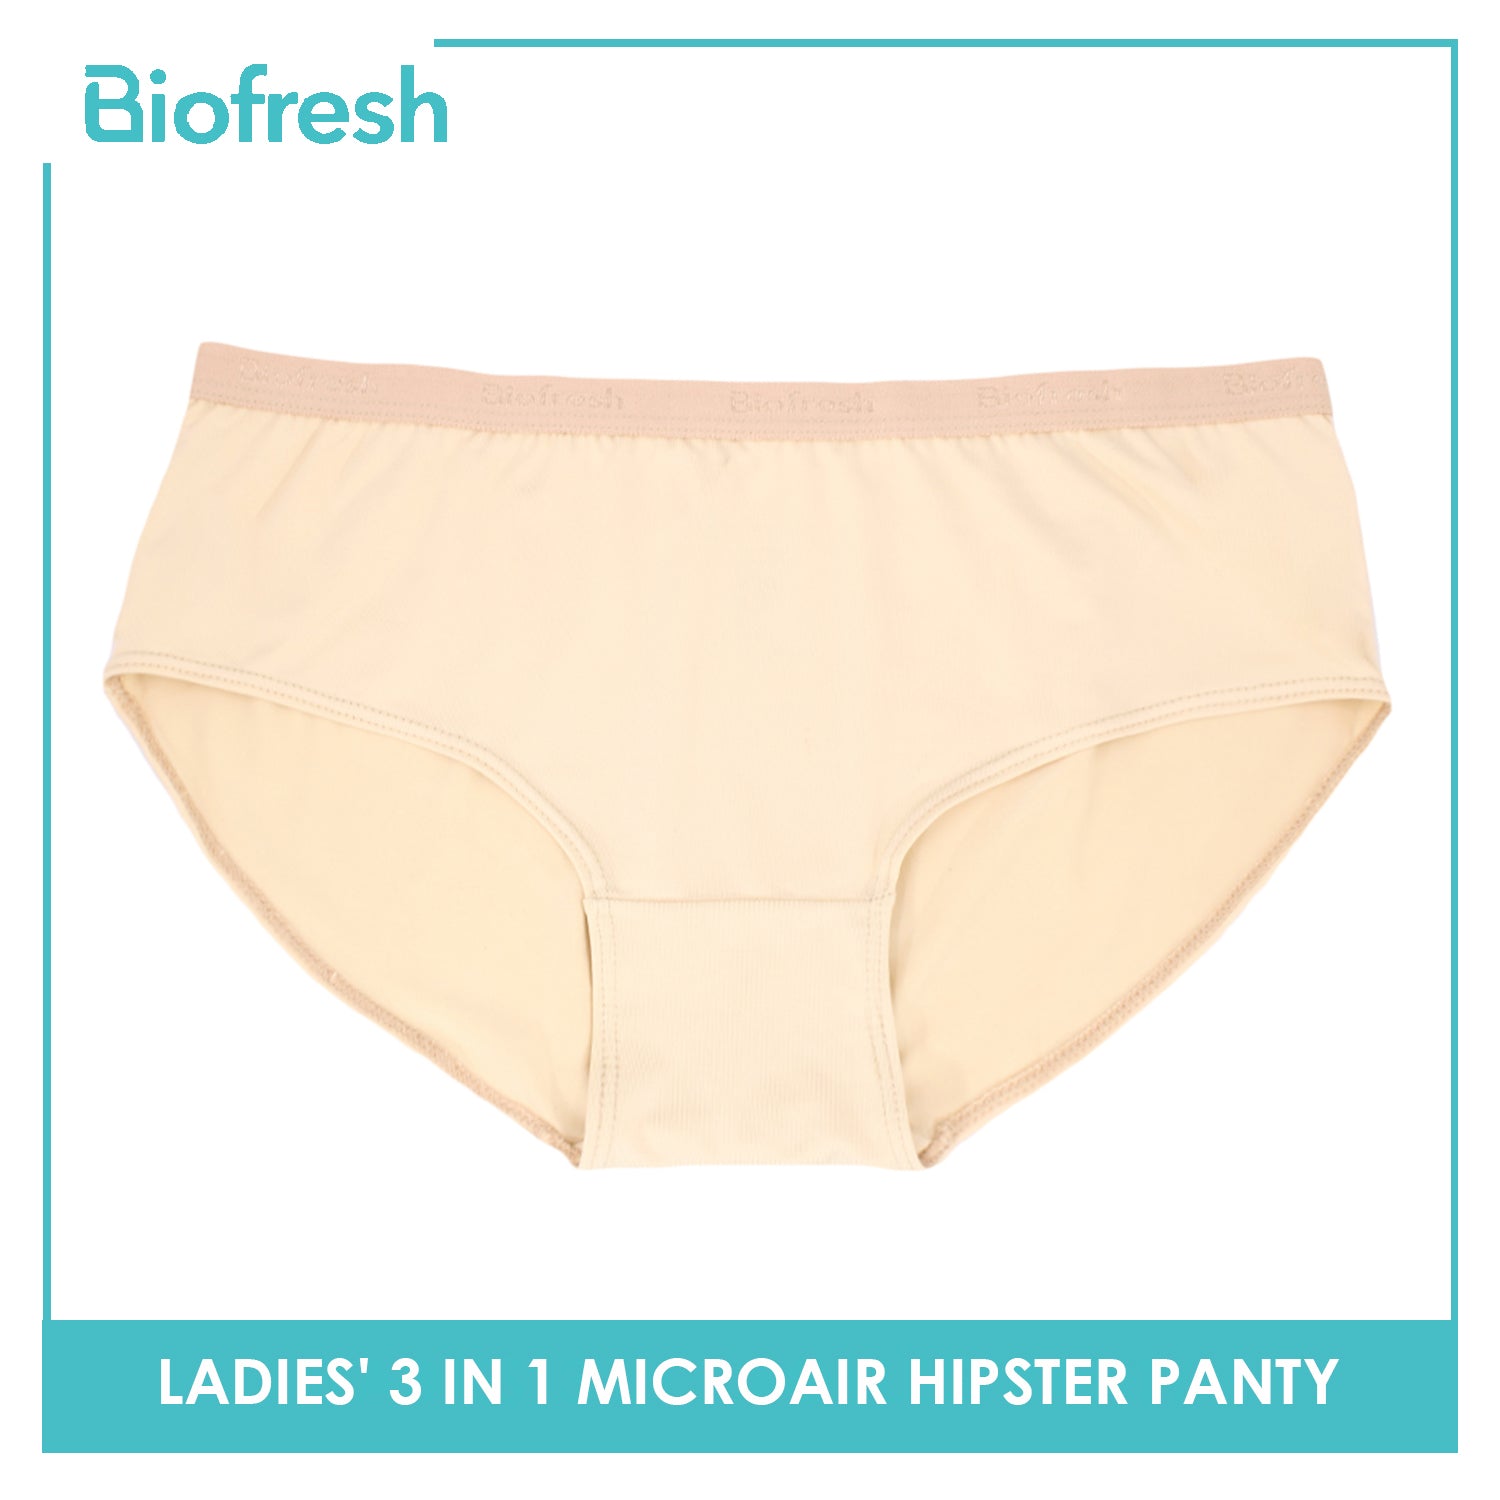 Biofresh PH - Feel light, airy and comfy this summer with Biofresh Men's  underwear collection! Made with ultra soft fabric and treated with  Fiberfresh Technology that kills odor causing bacteria. Keeping you